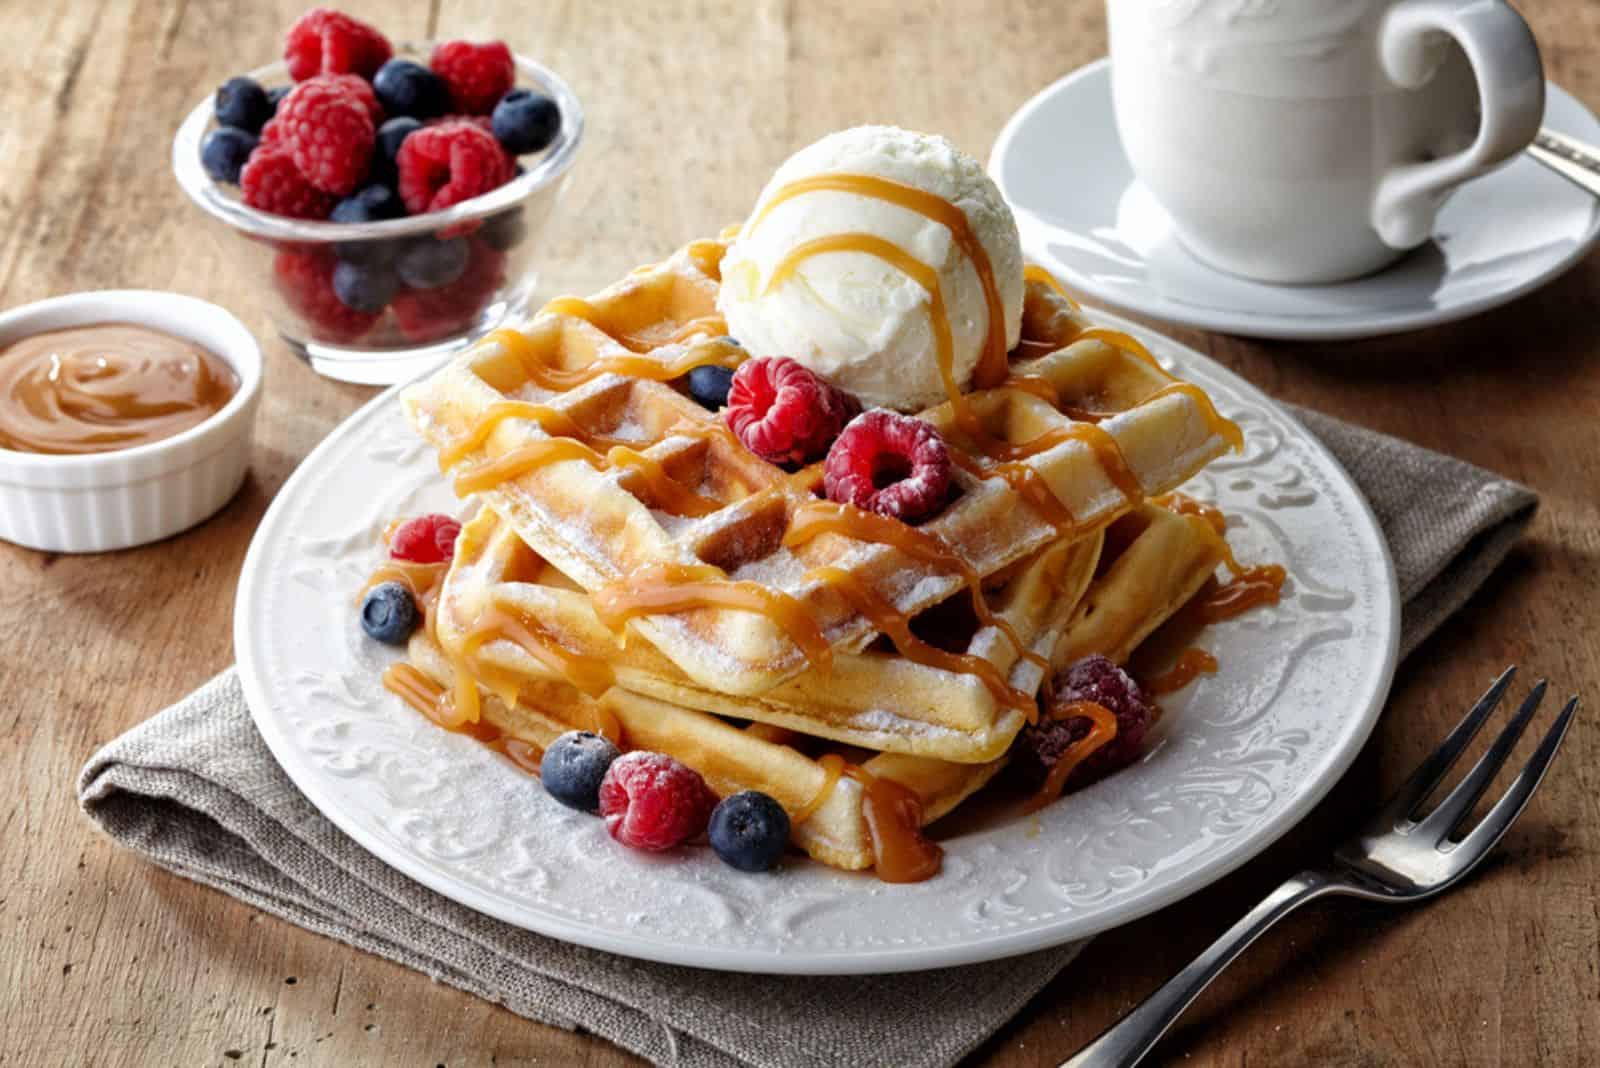 Plate of belgian waffles with ice cream, caramel sauce and fresh berries
